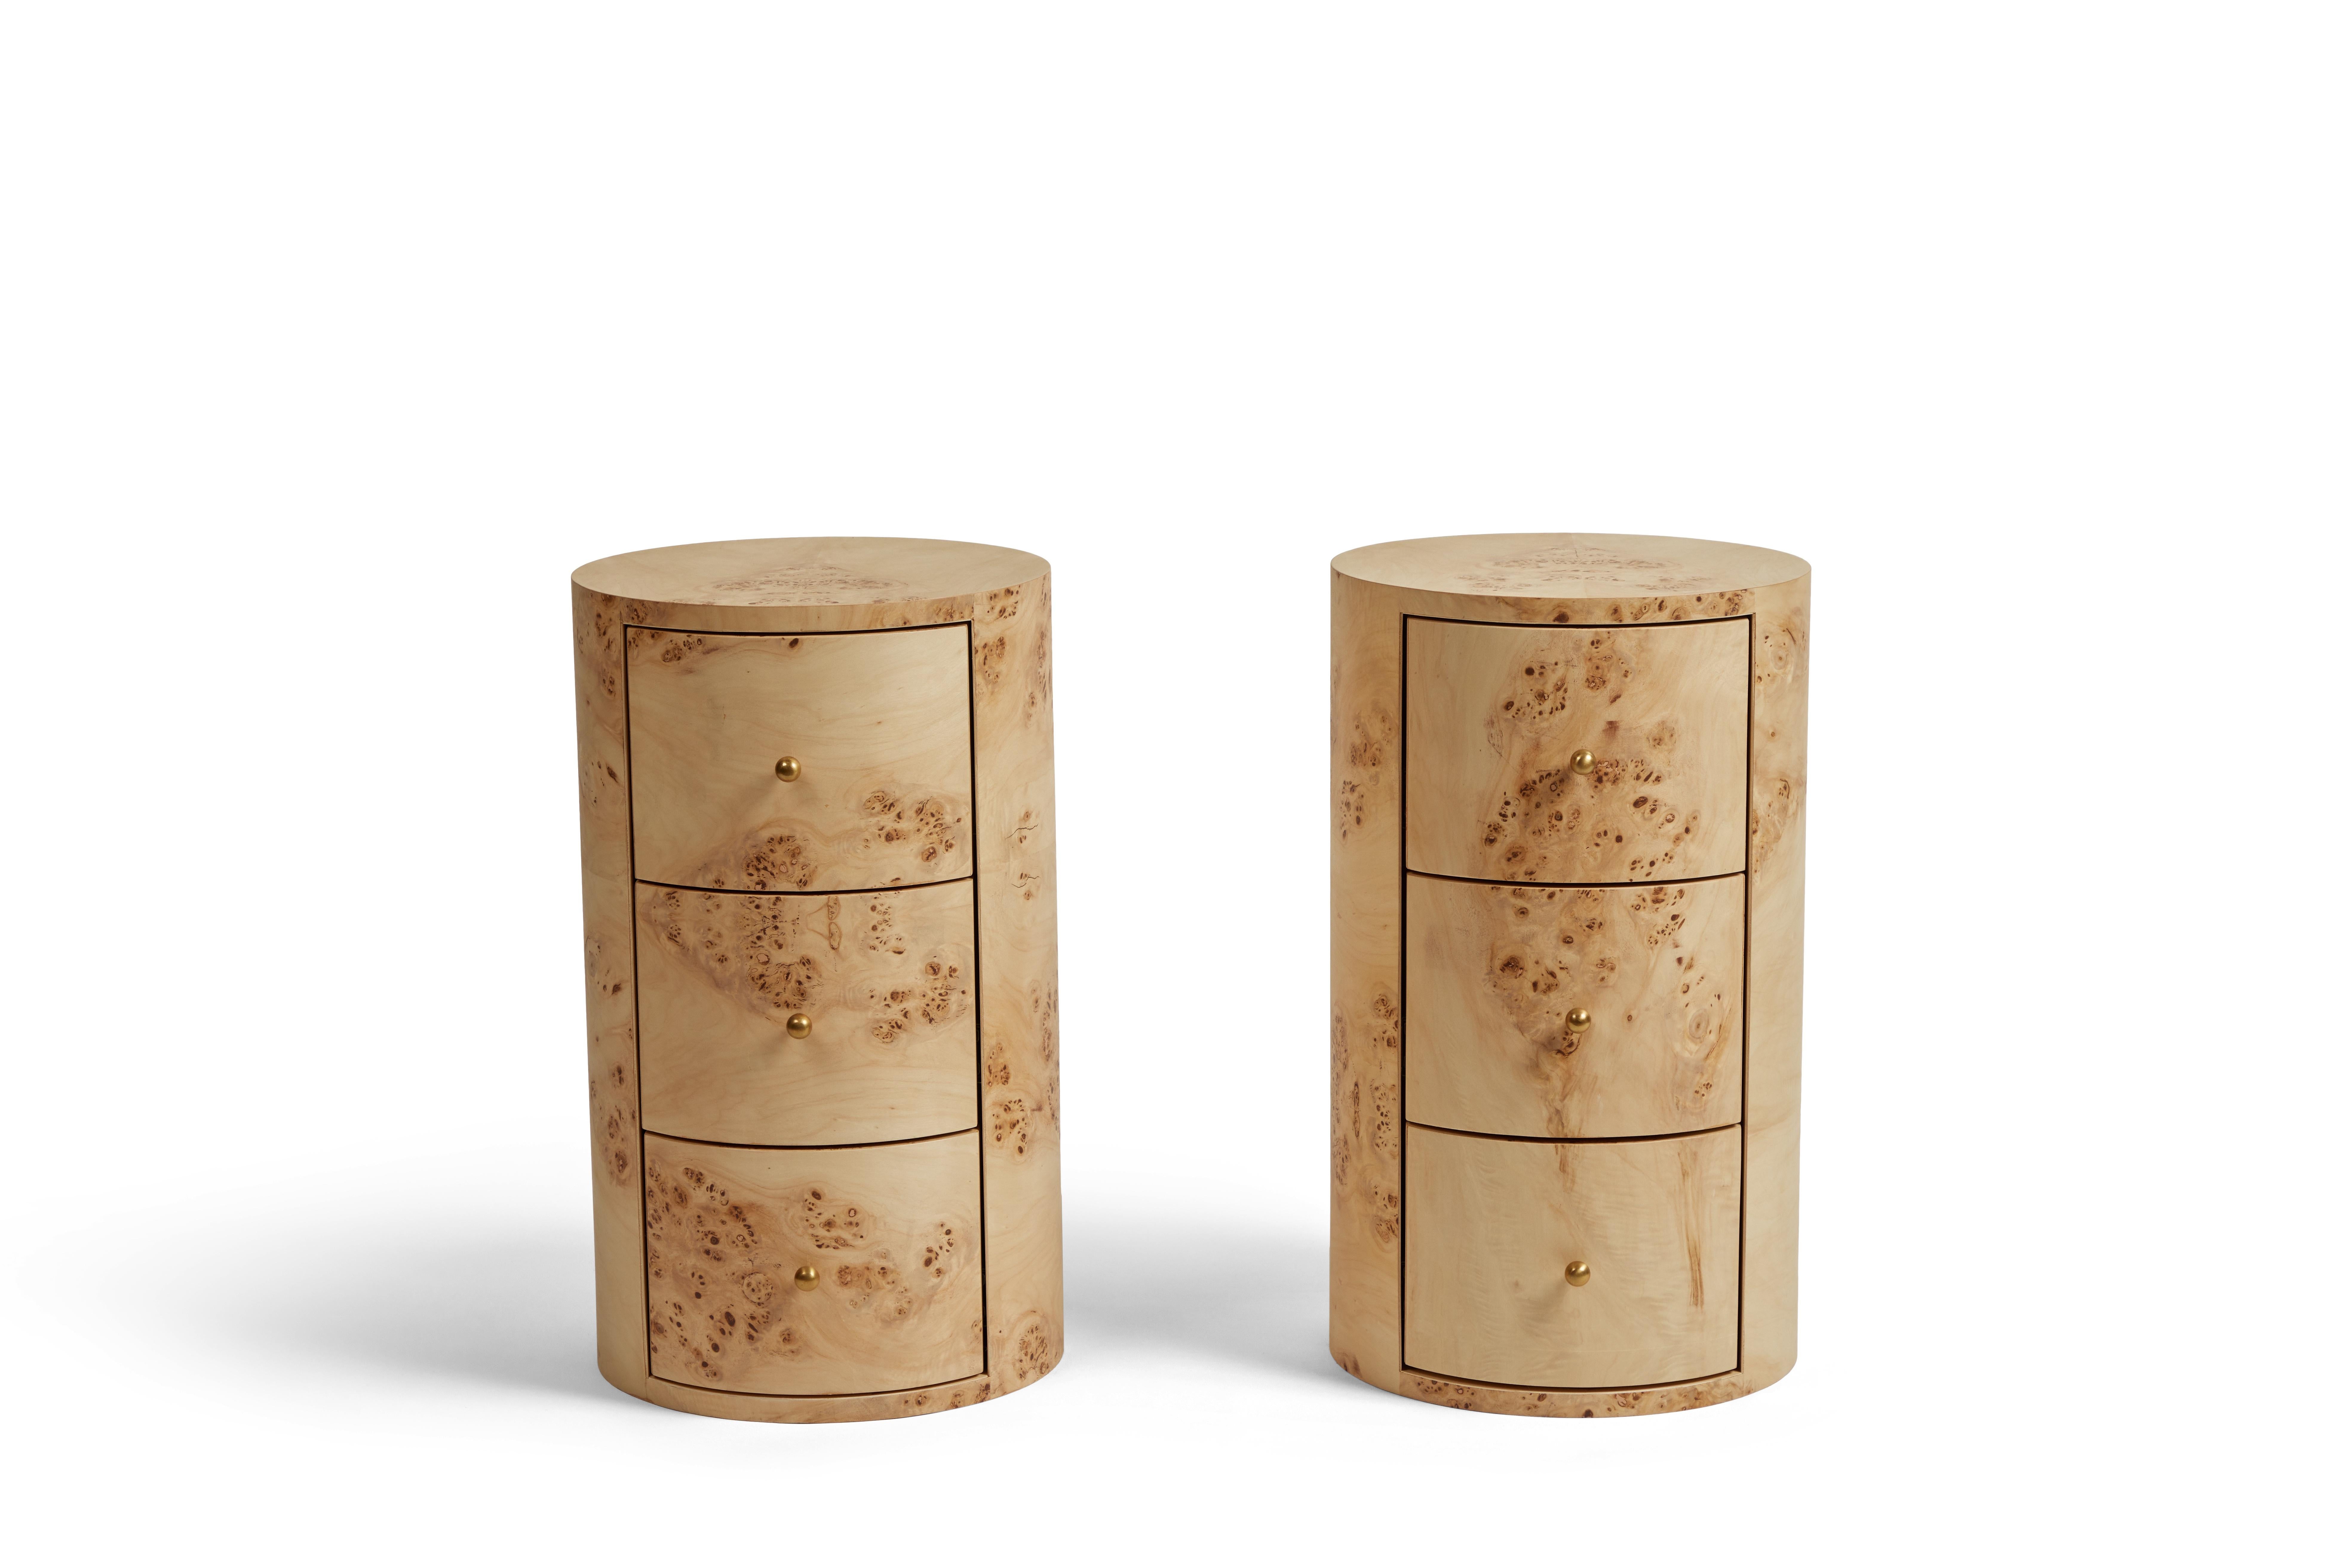 This cylindrical side table features a beautiful burl wood veneer that adds natural and organic texture to any space. The tables feature three drawers with petite aged unlacquered brass knobs. Use as a side table or nightstand. 
 
DIMENSIONS: 14